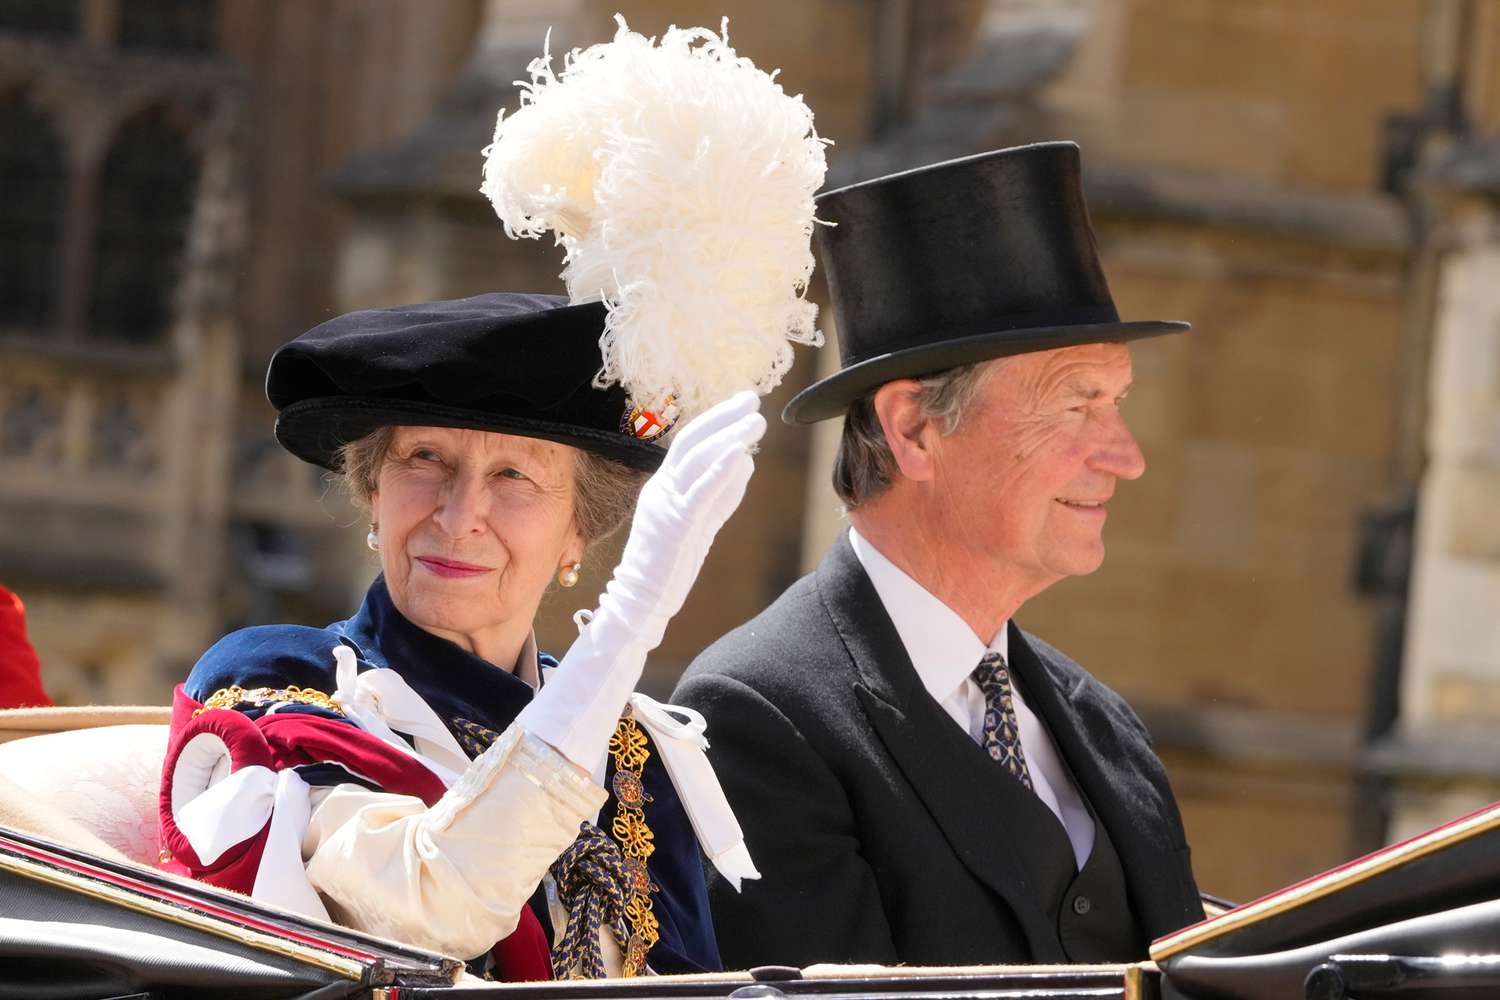 When Will Princess Anne Return to Royal Work After Hospital Stay? [Video]